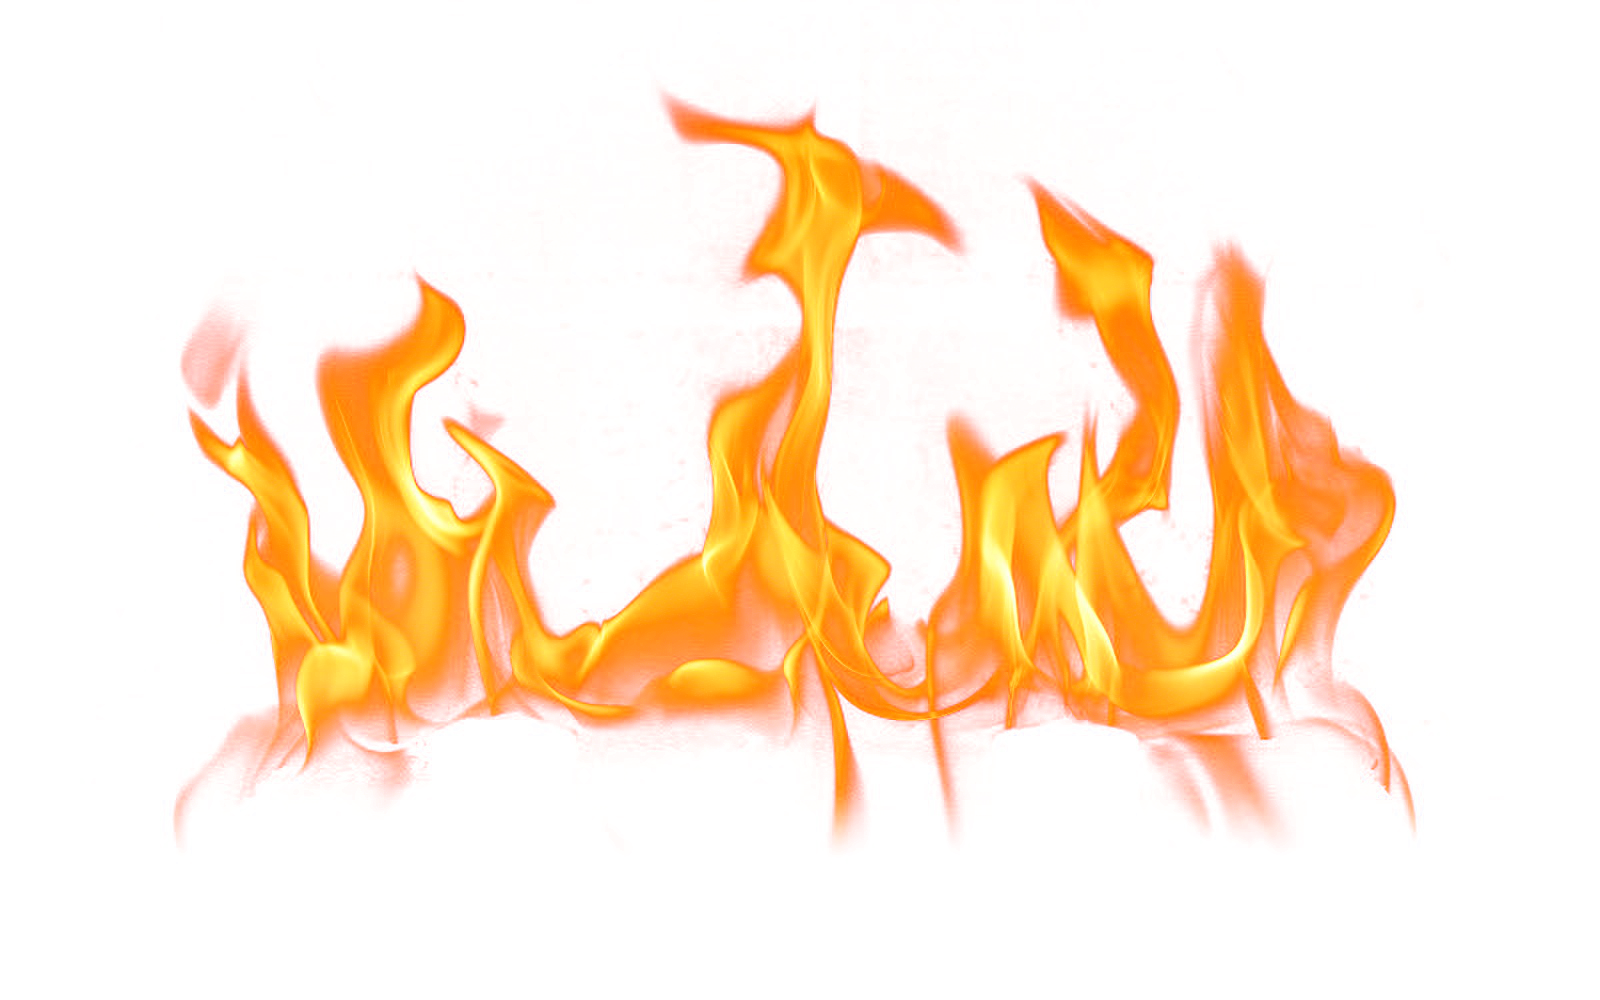 Download PNG image - Fire Fla